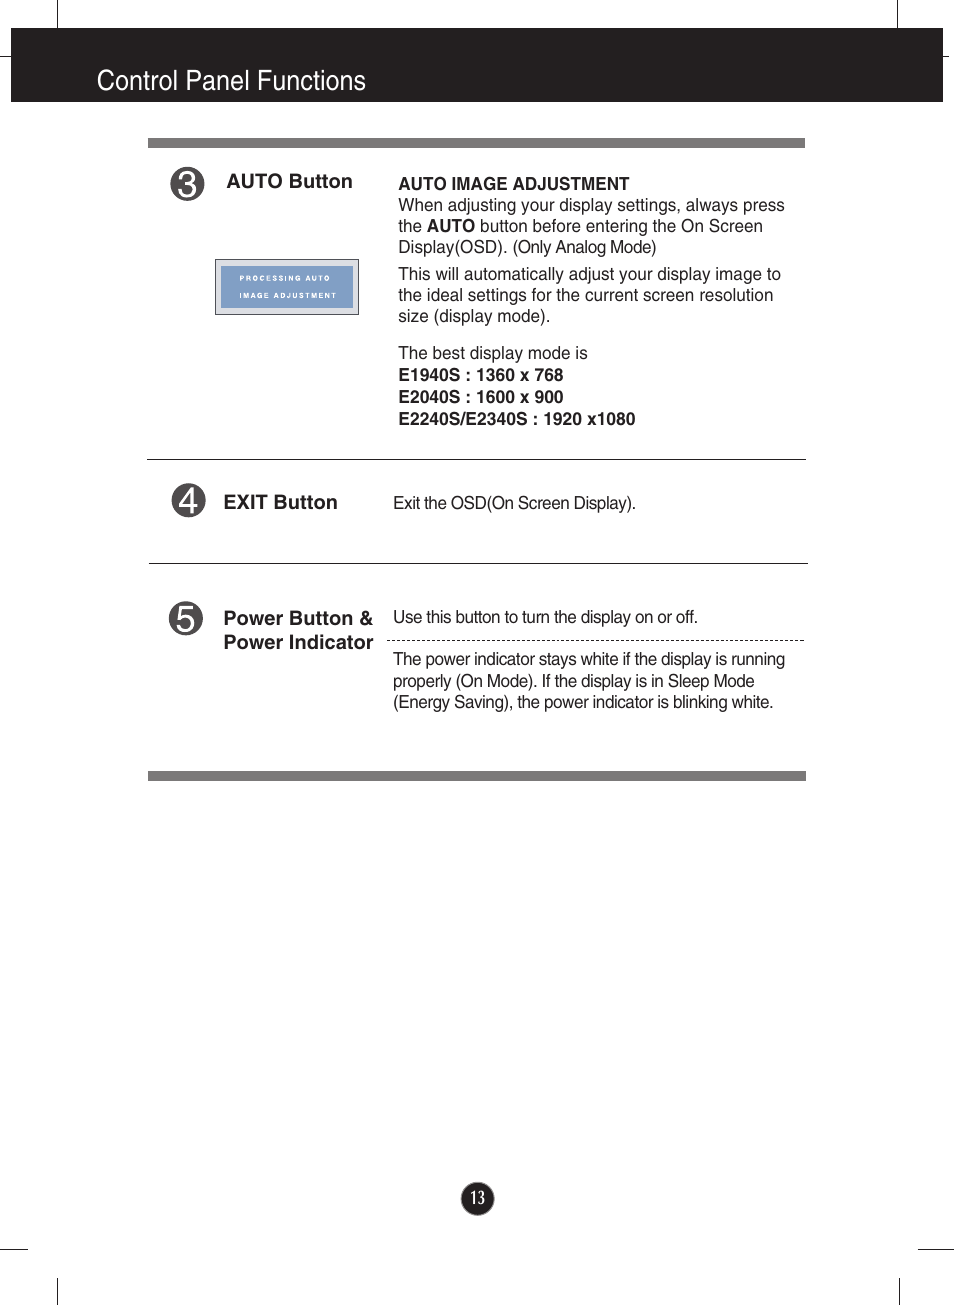 Control panel functions | LG E2040T-PN User Manual | Page 14 / 39